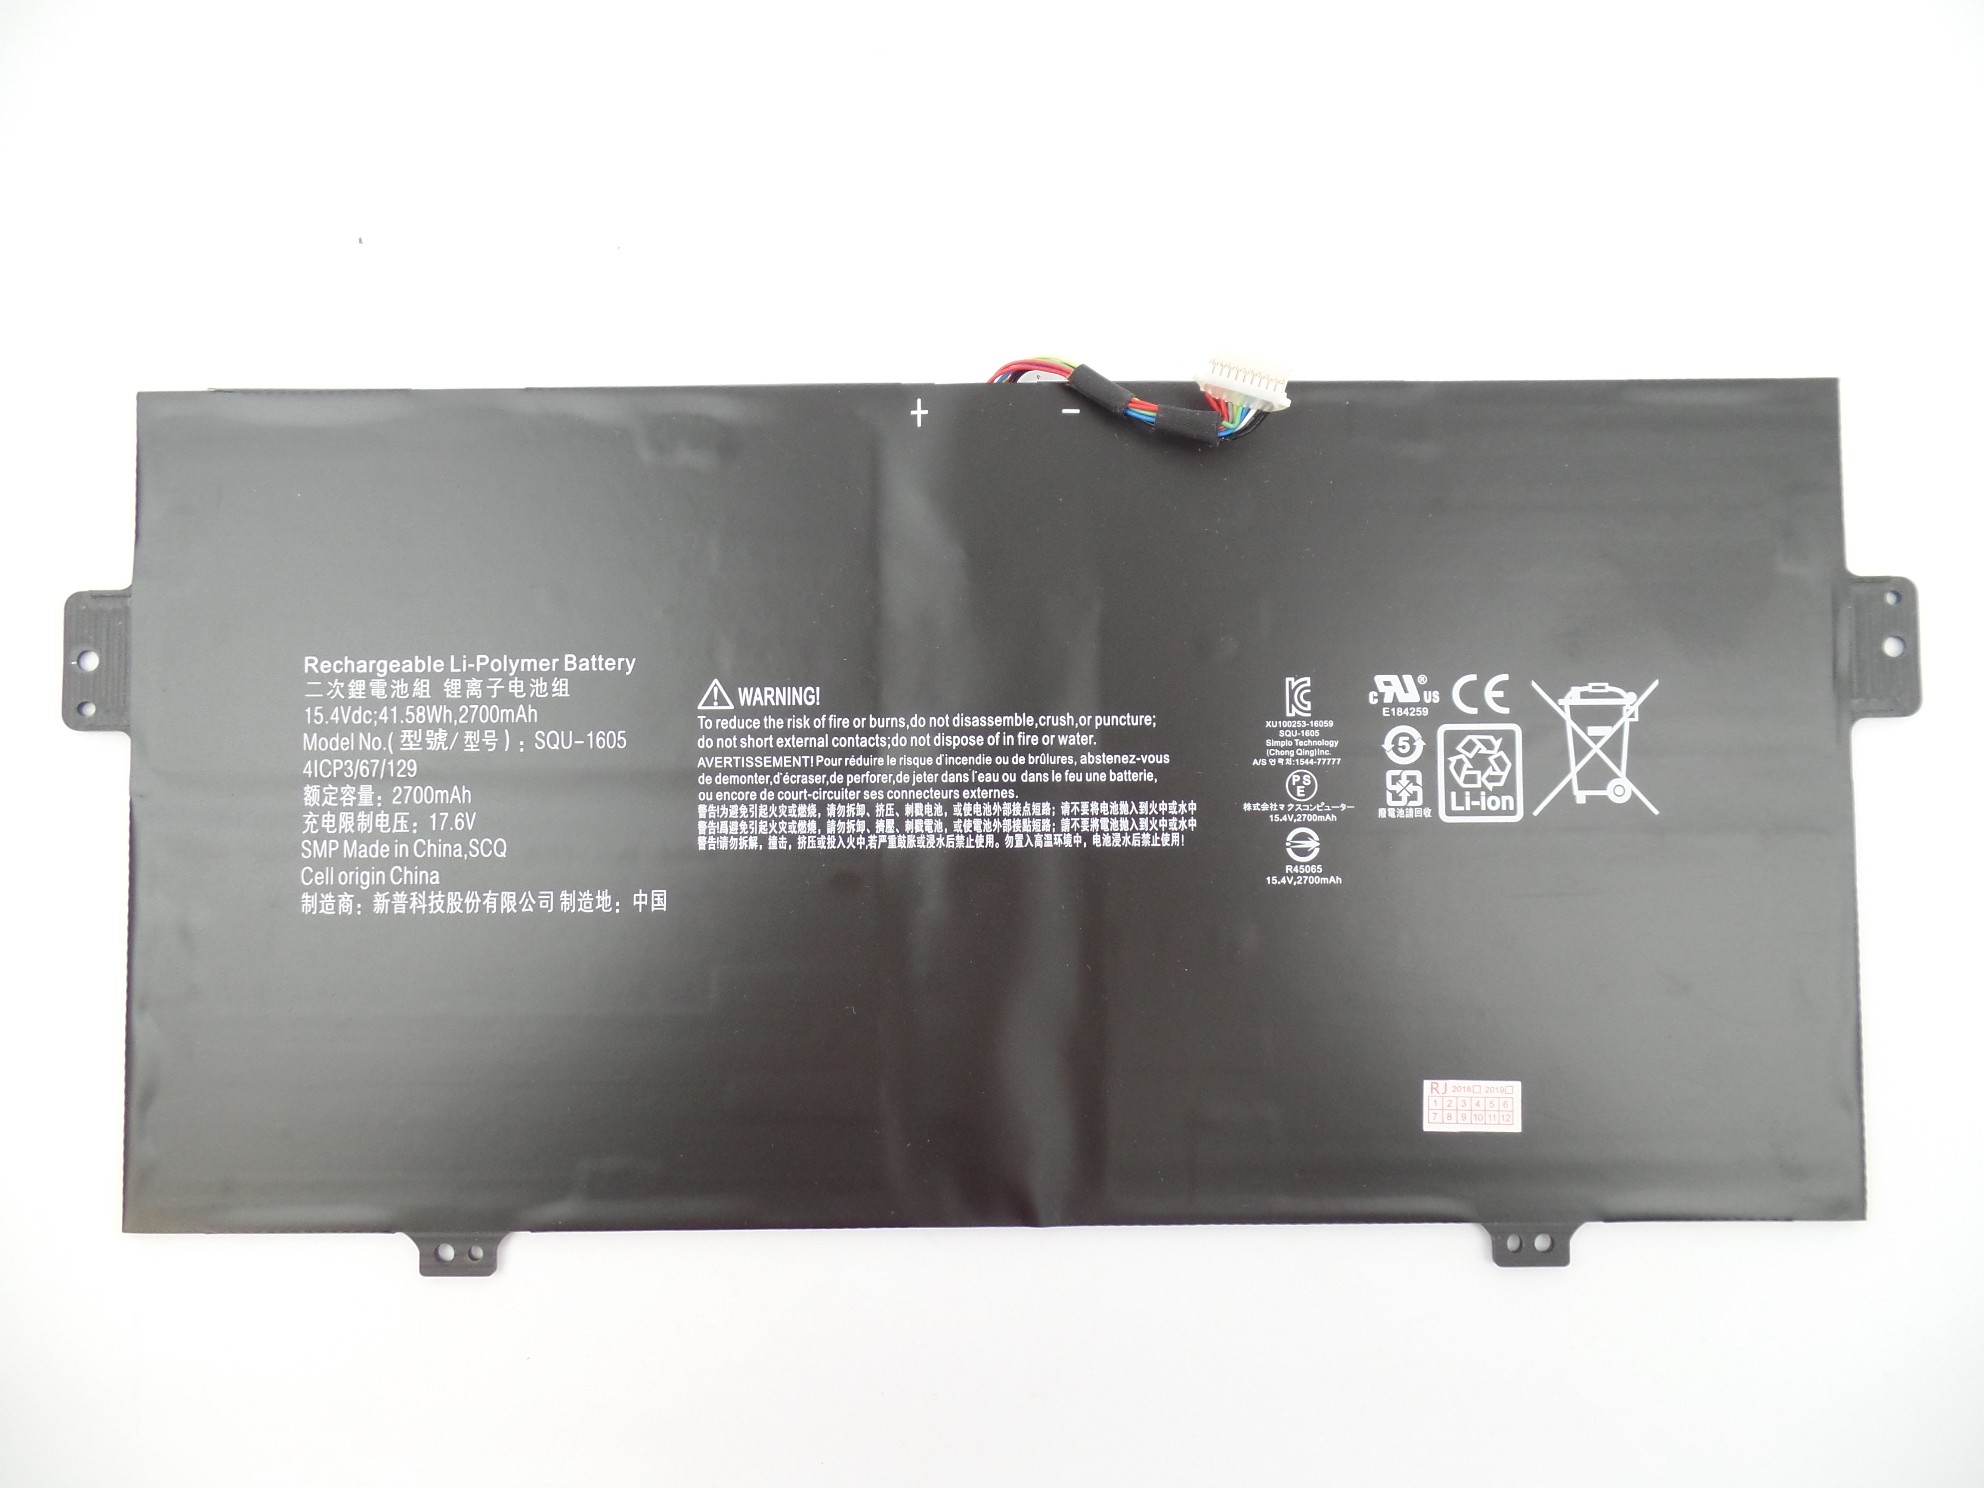 OEM Genuine Battery SQU-1605 for Acer Spin 7 SP714-51 Series 4ICP3/67/129 